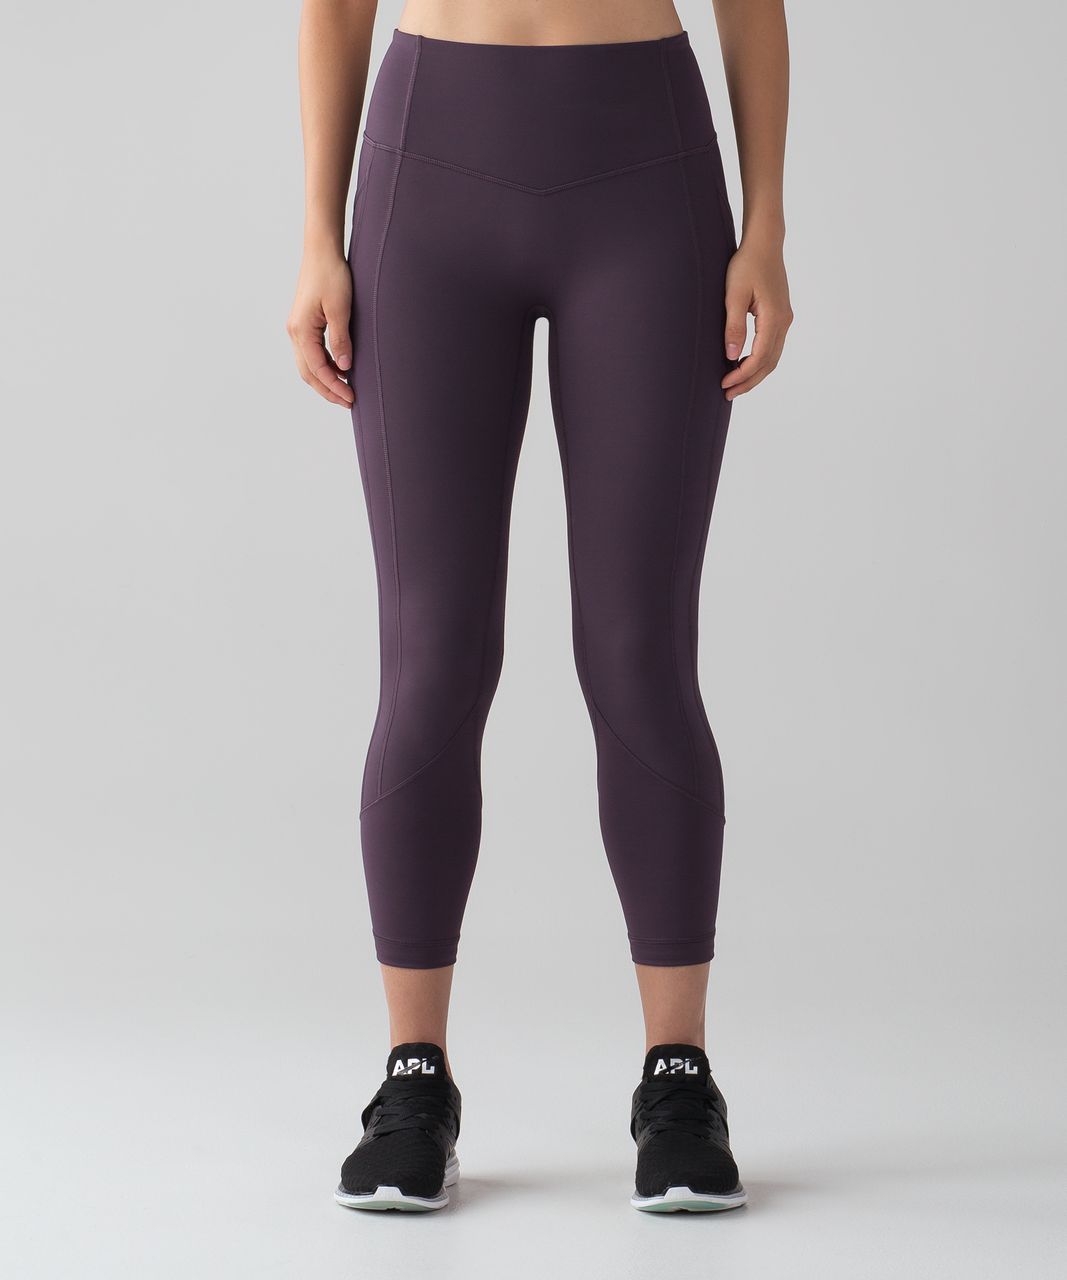 Lululemon All The Right Places Crop II (23") - Black Currant